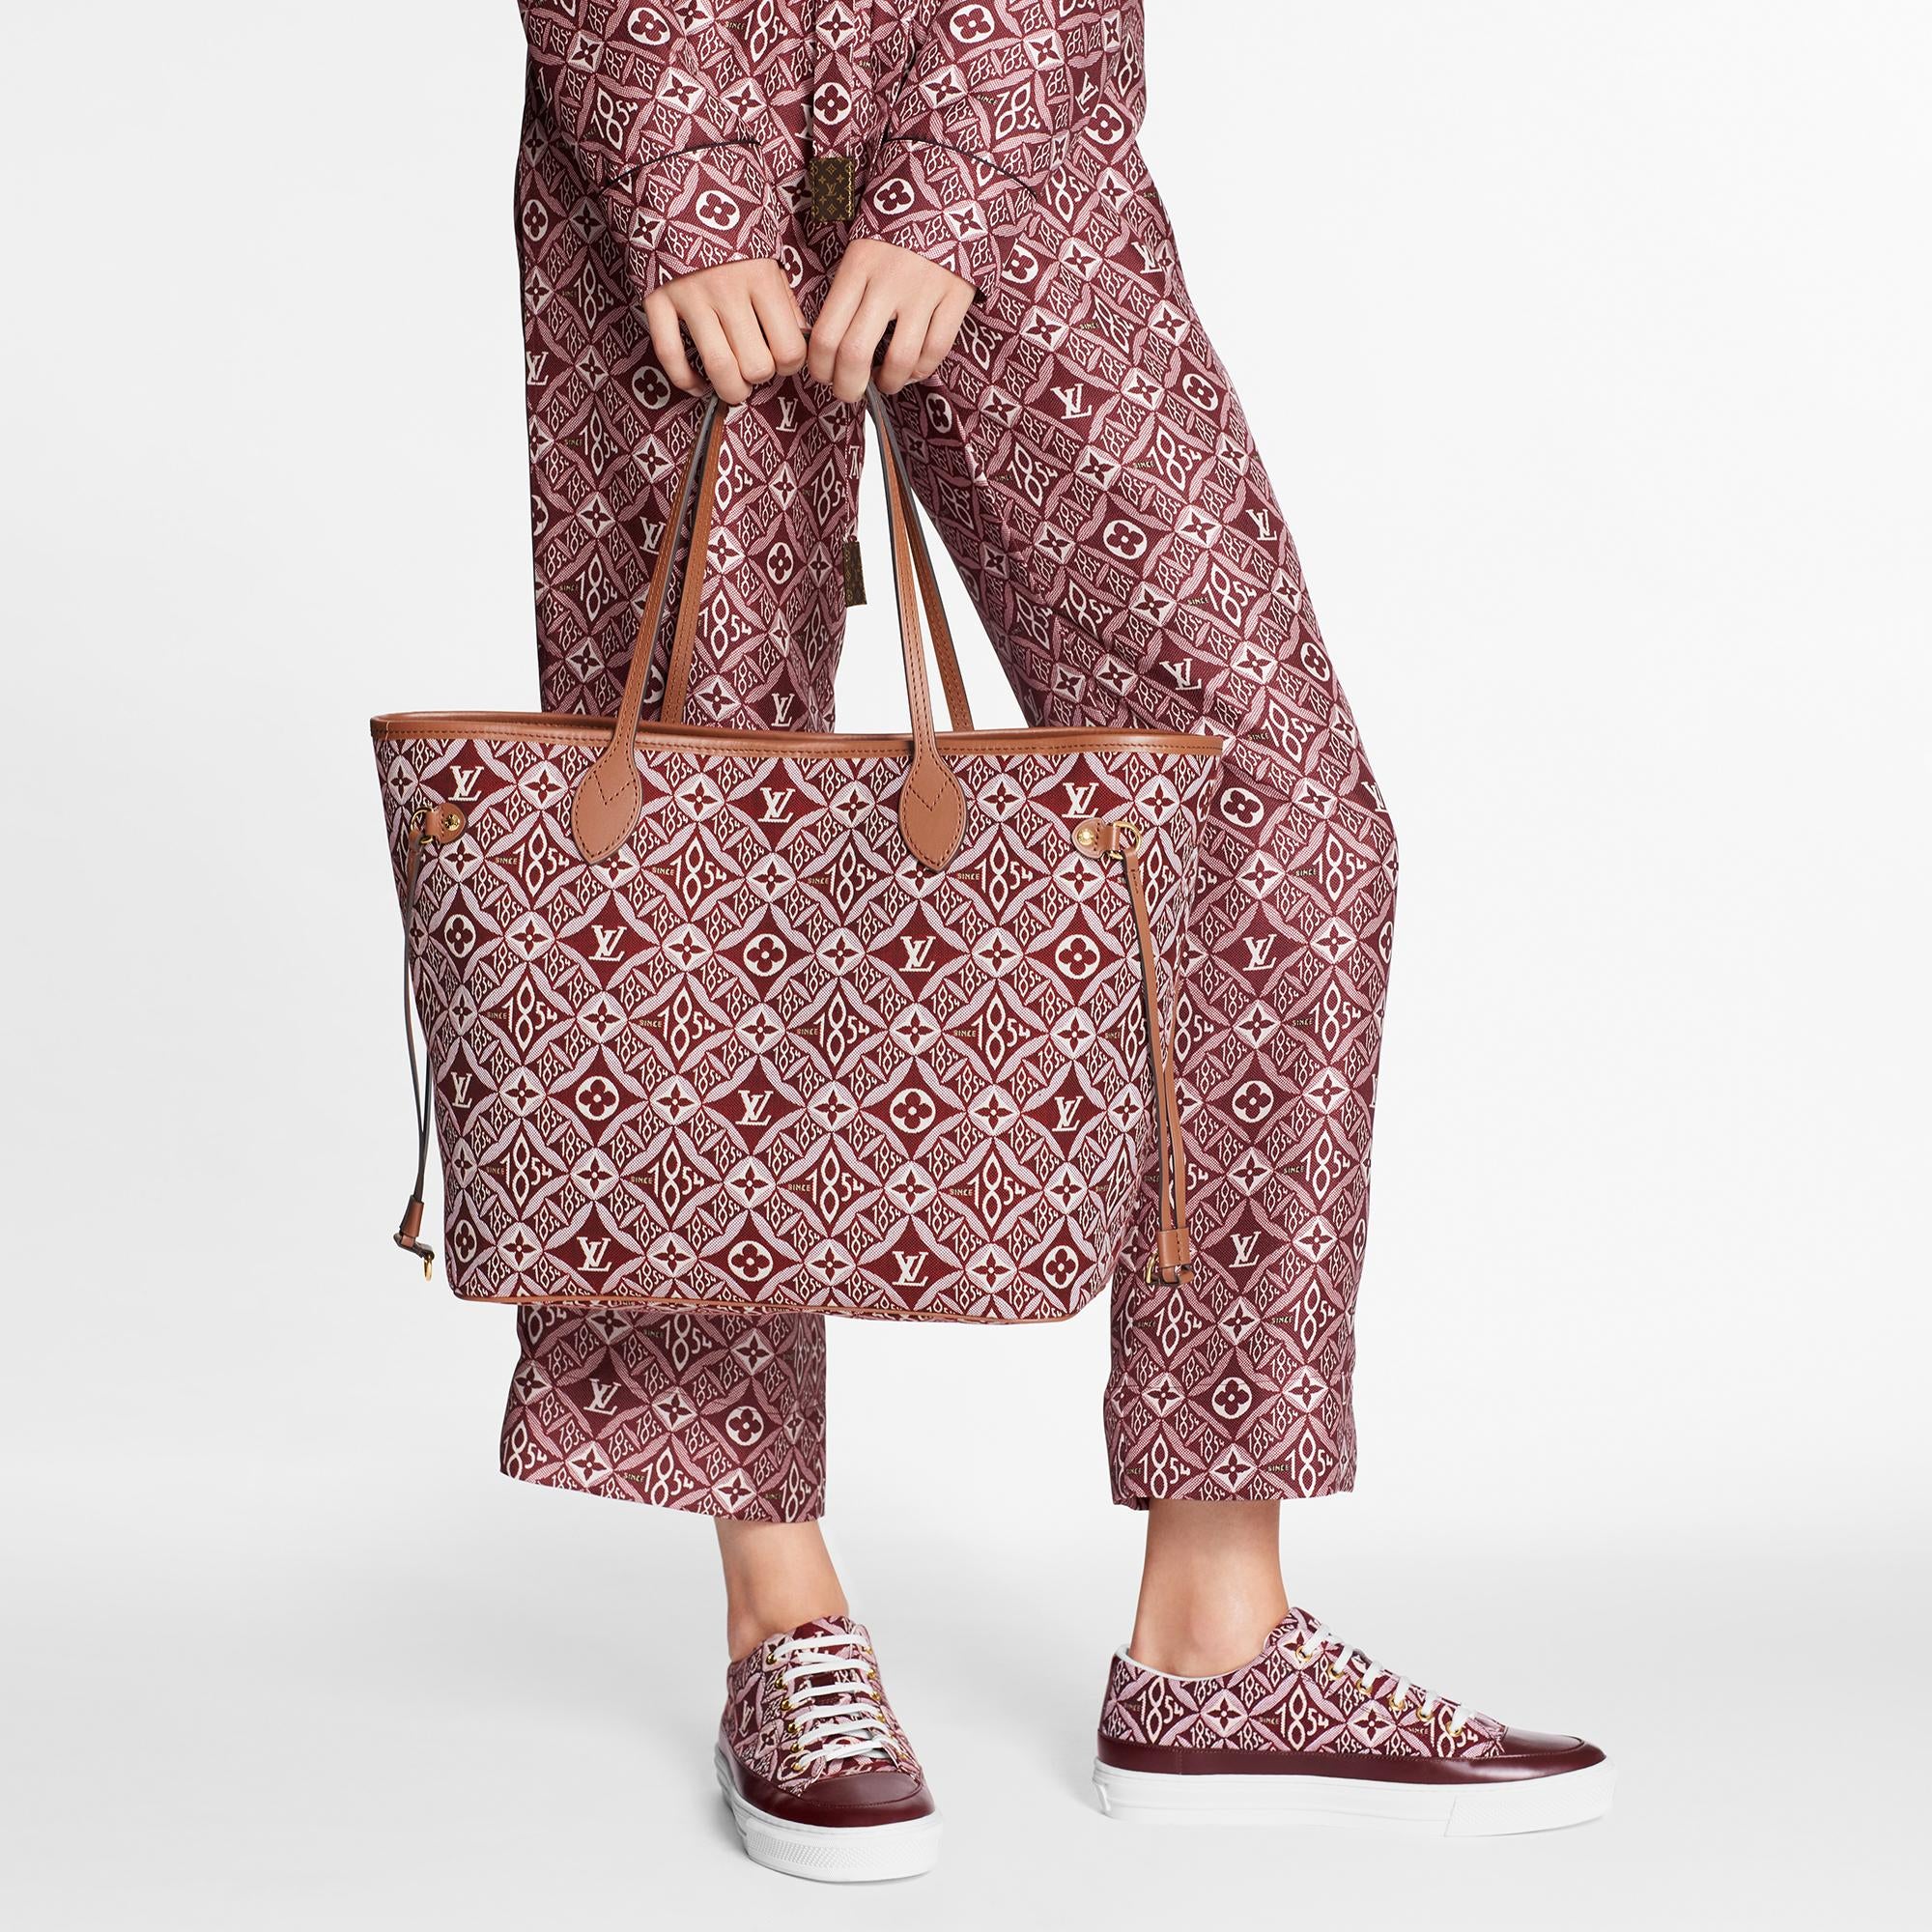 New Louis Vuitton Neverfull Limited Editions 2020-2021 since 1854 neverfull